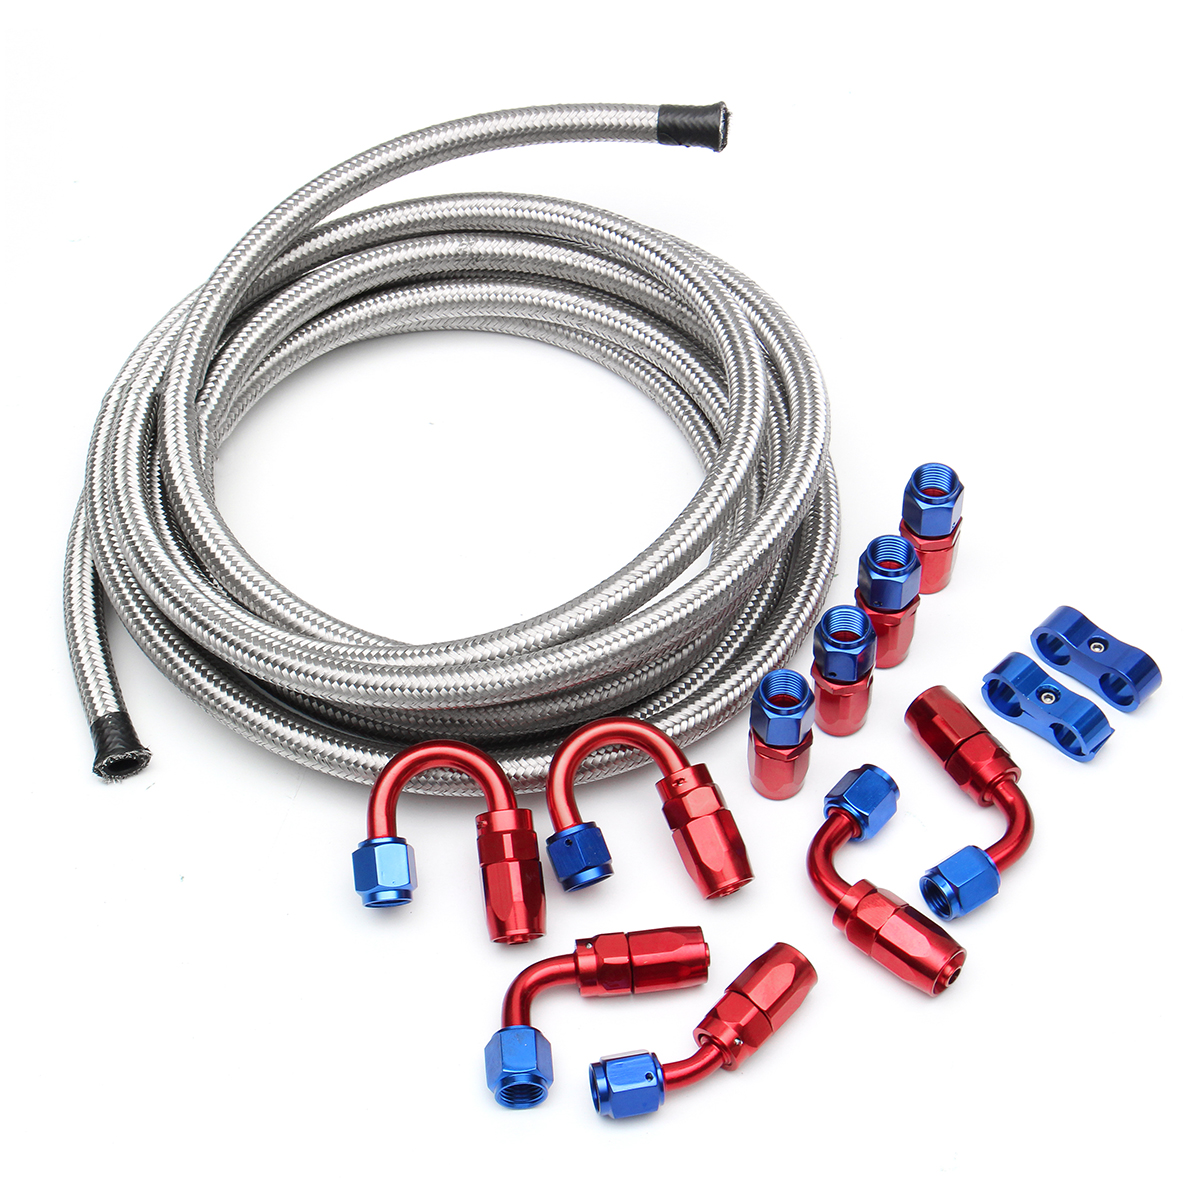 5M AN6 Braided Oil Fuel Line Hose with Fitting End Adapter Kit Set Stainless Steel